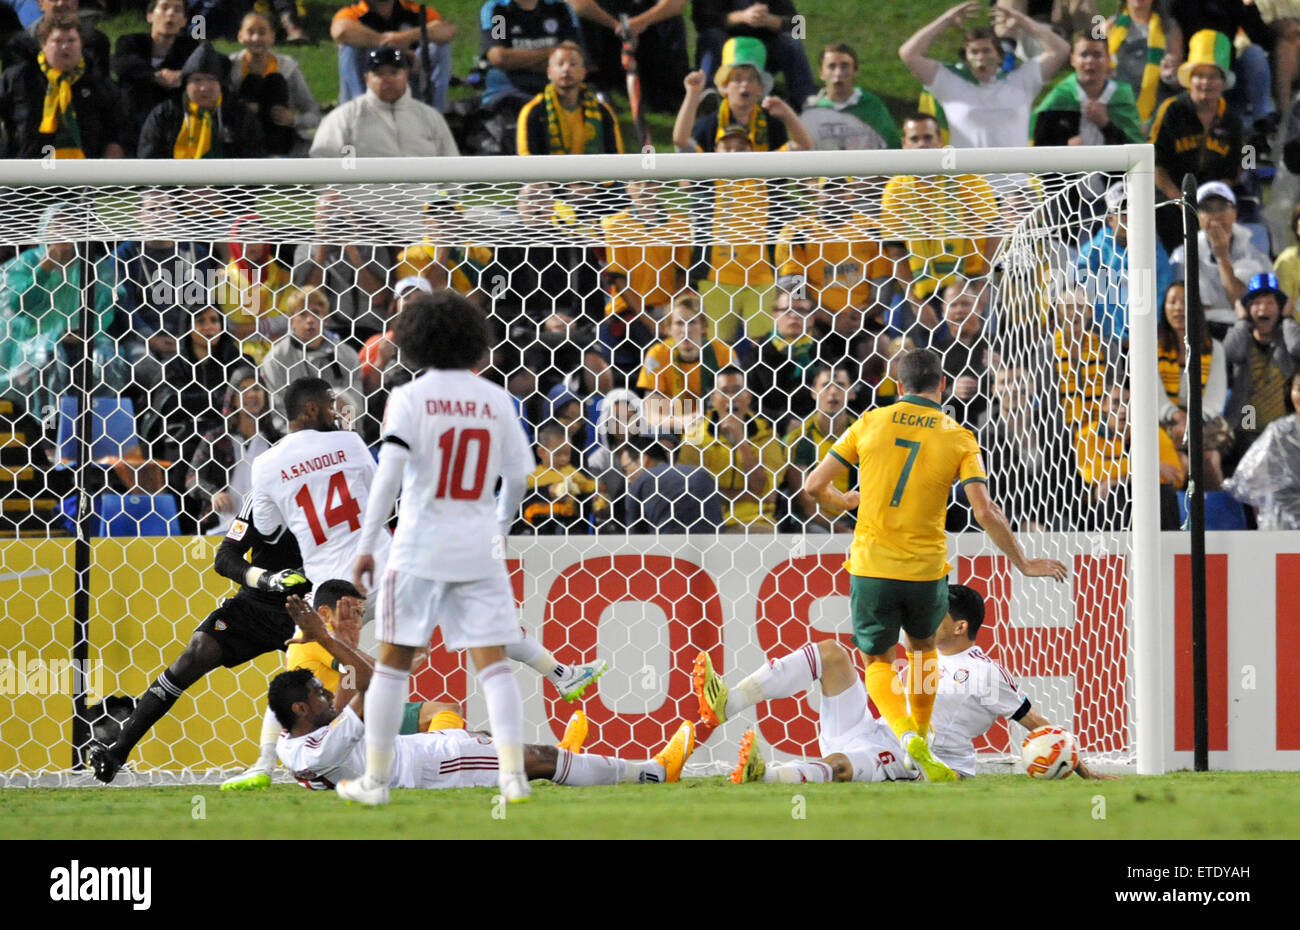 Australia scored two early goals to defeat the United Arab Emirates in the Asian Cup International 2015 Semi Finals and now face South Korea on the final on Saturday (31Jan15)  Featuring: Jason Davidson Where: Newcastle, Australia When: 27 Jan 2015 Credit: WENN.com Stock Photo